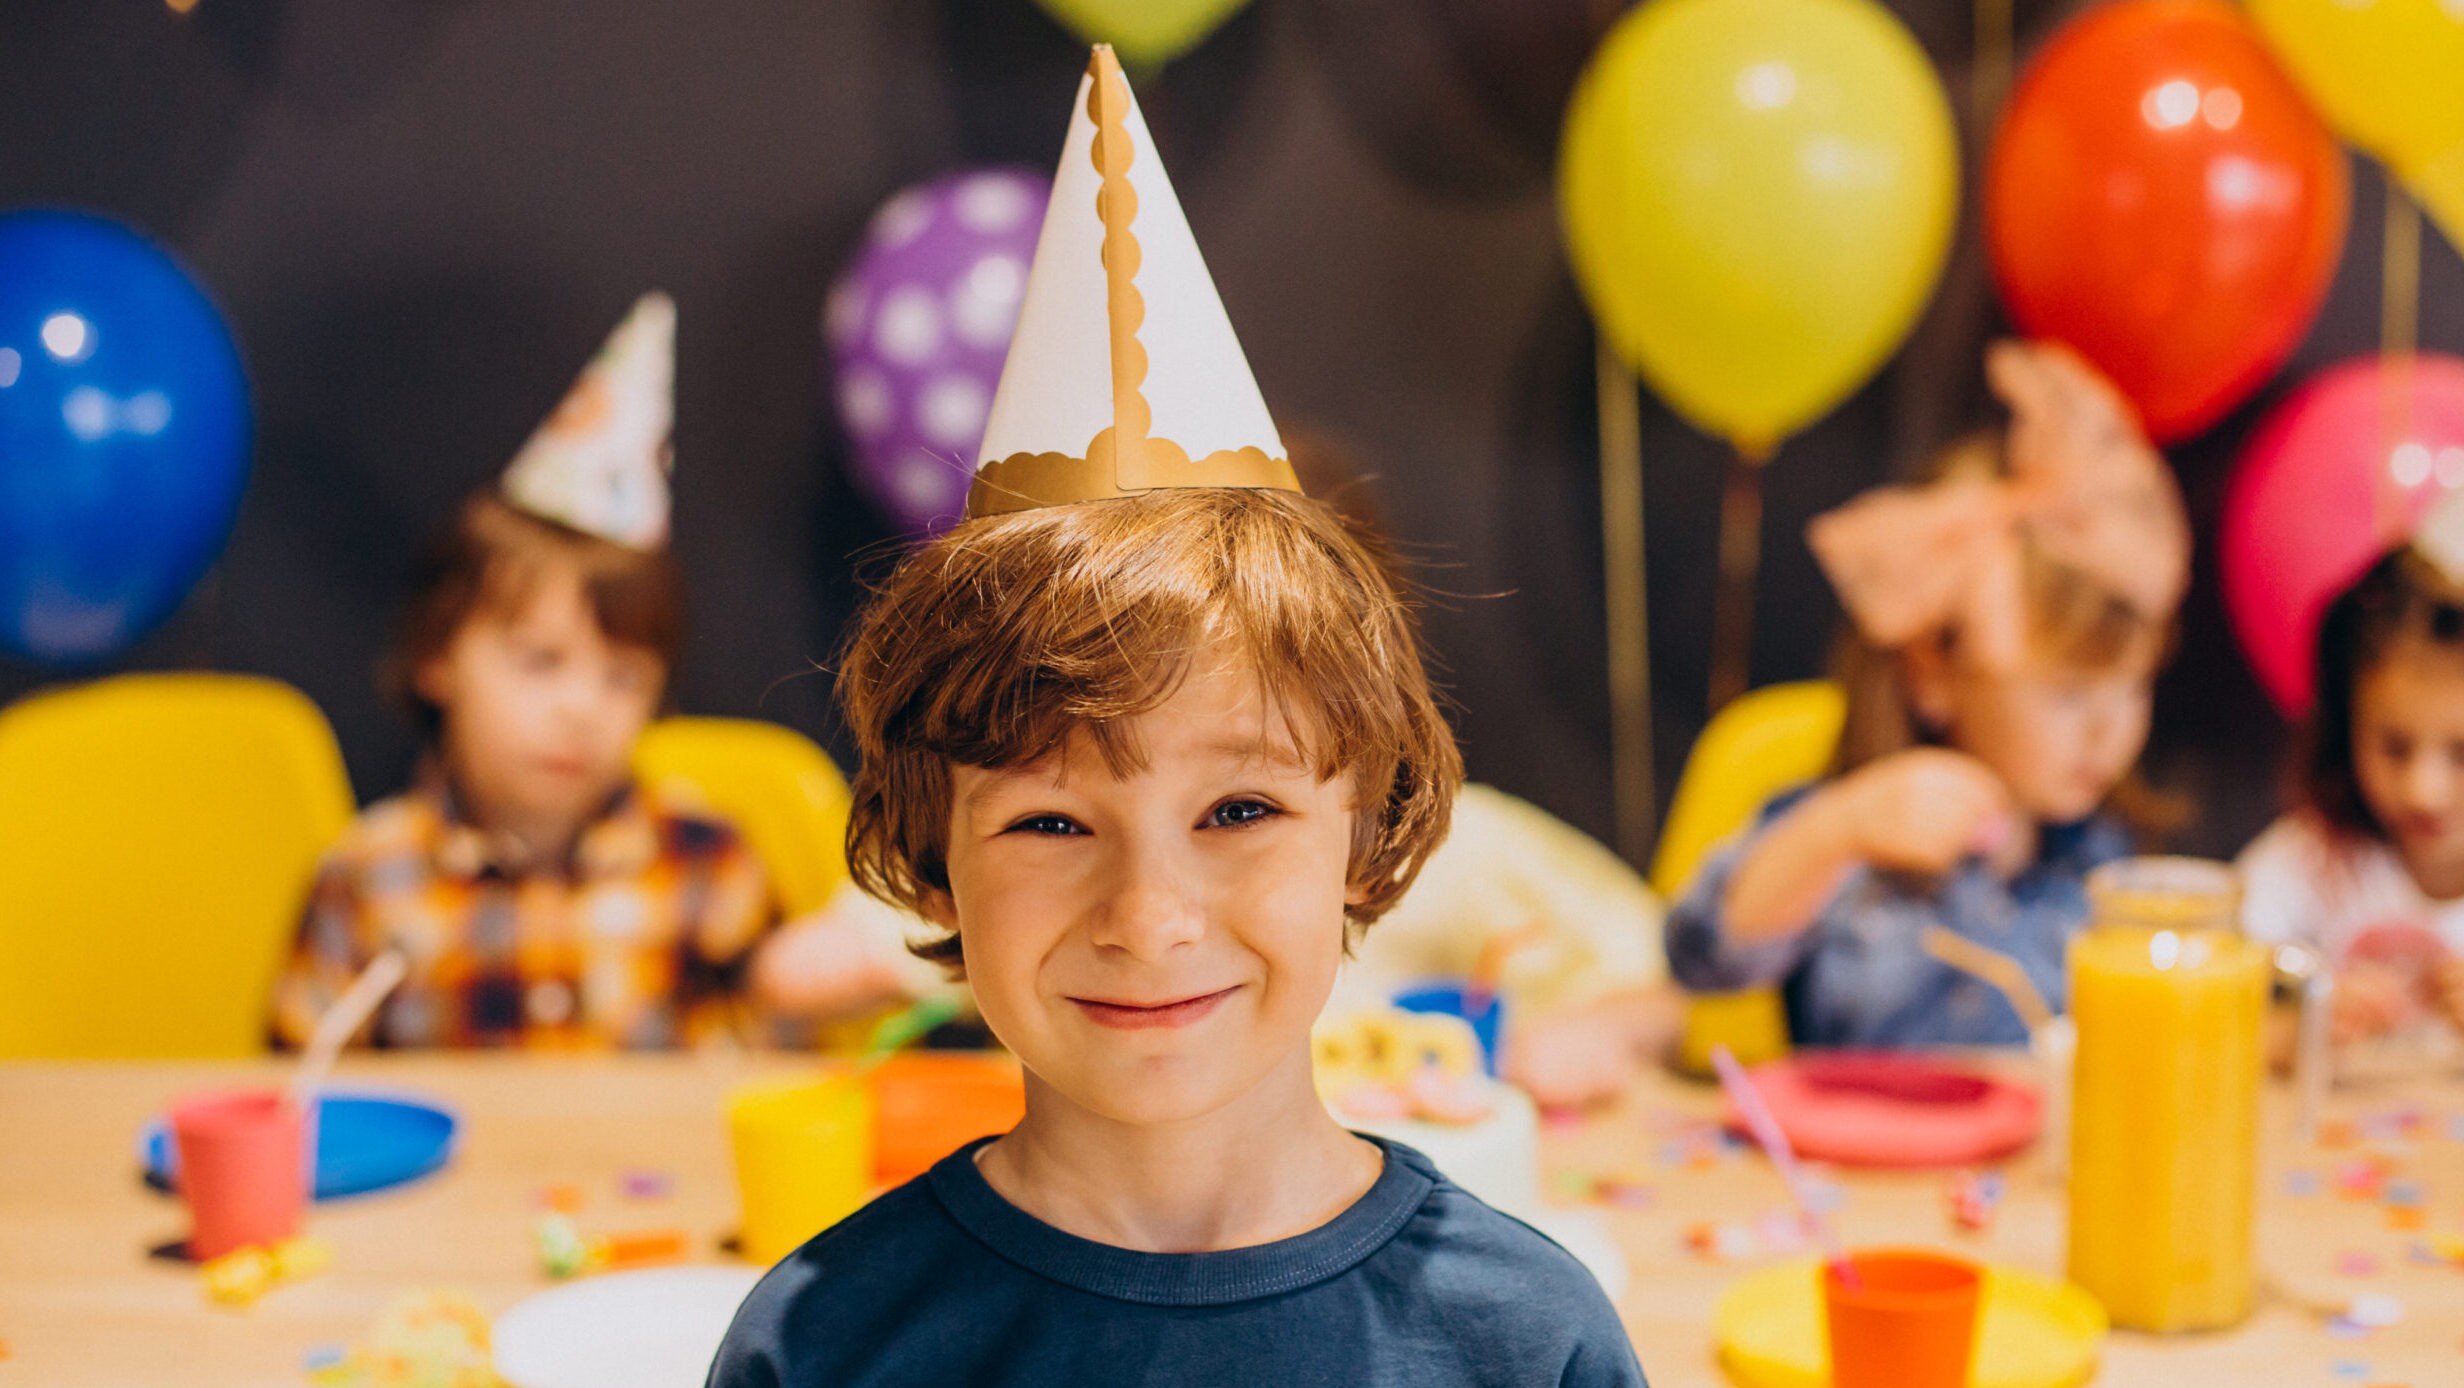 Our Franchise Goes Far Beyond Just Being a Kids’ Party Room